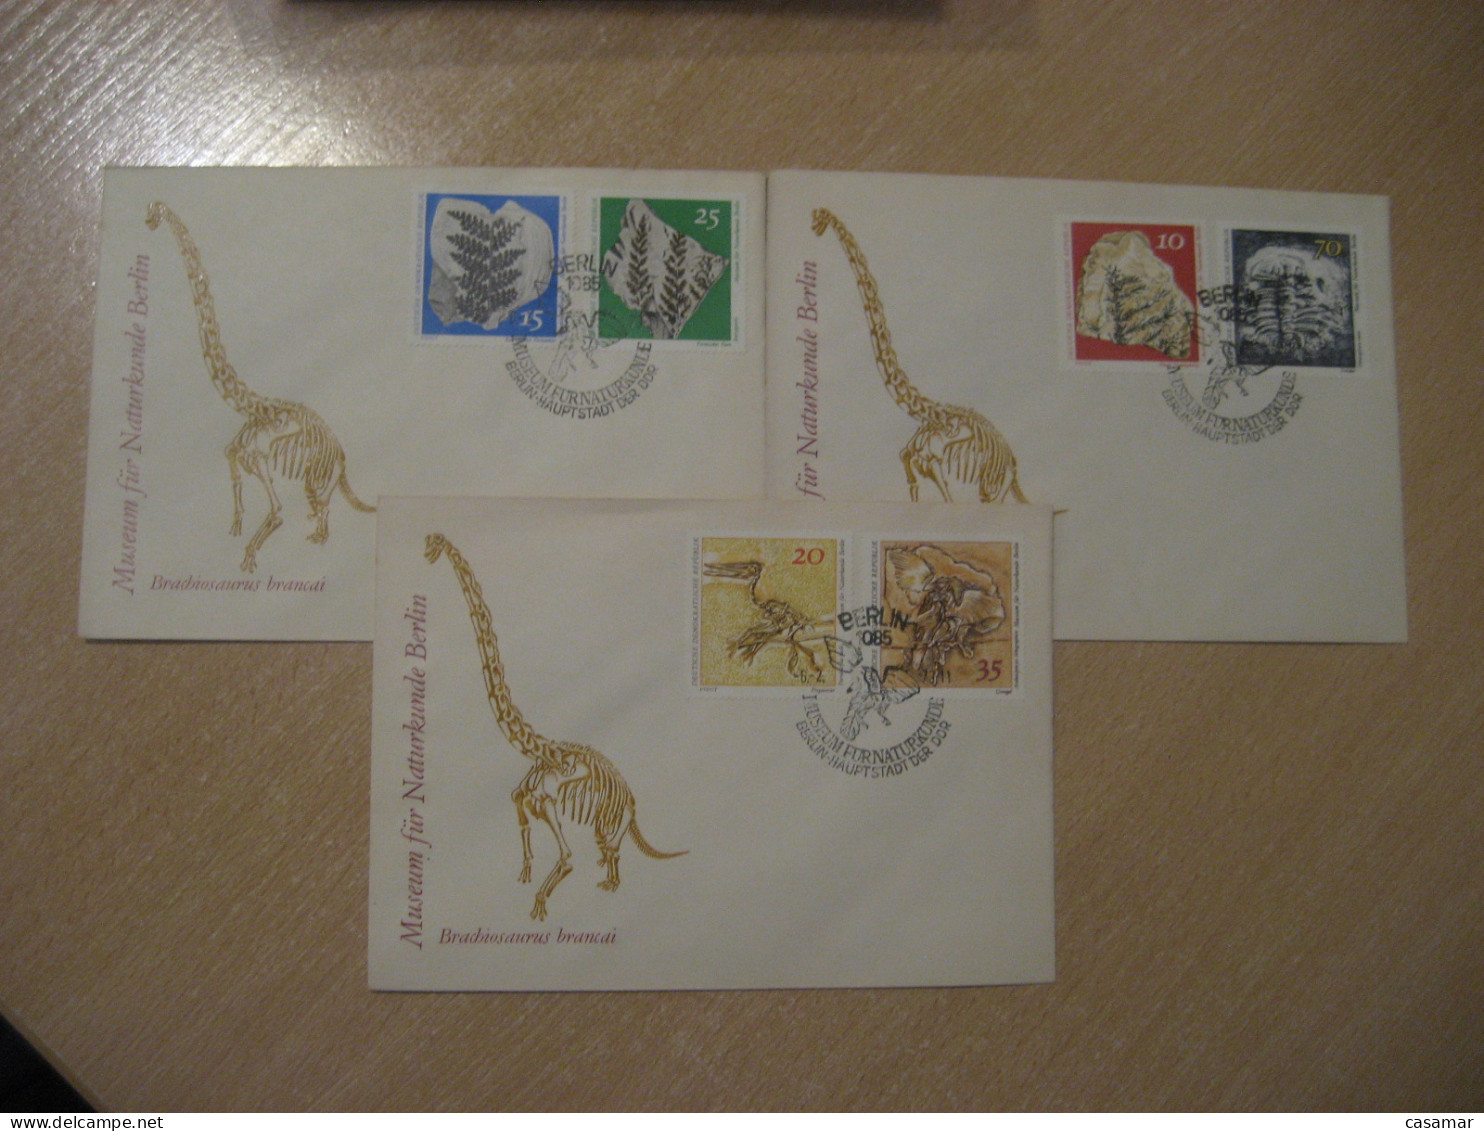 BERLIN 1973 Yvert 1519/24 Prehistoric Animals FDC Cancel 3 Cover DDR Fossil Fossils Animals Fossiles Geology Geologie - Fossilien